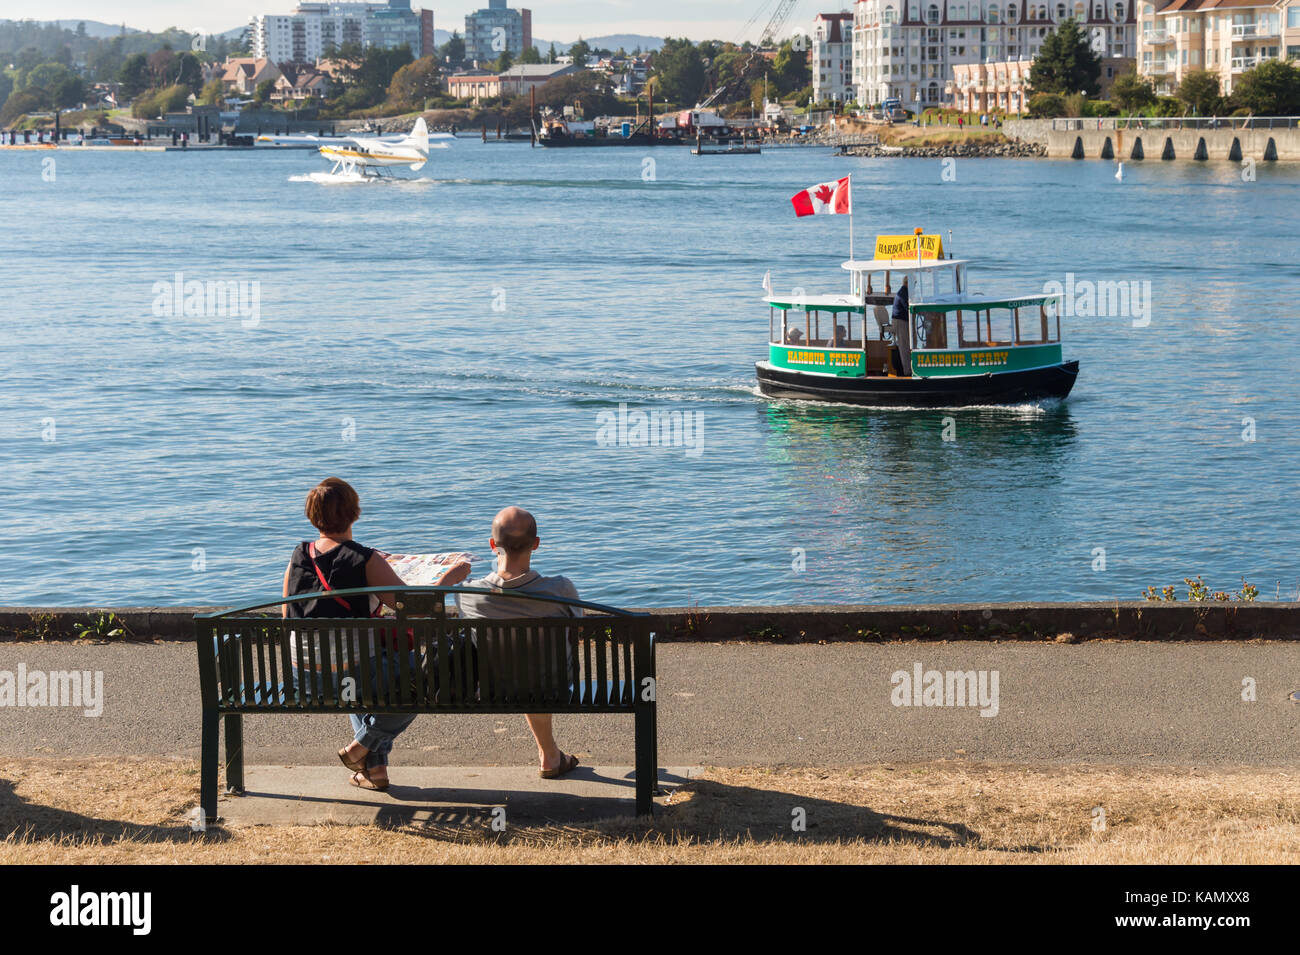 Victoria, BC, Canada - 11 September 2017: Couple looking at the Pacific Ocean from David Foster Way as a water taxi is passing by Stock Photo